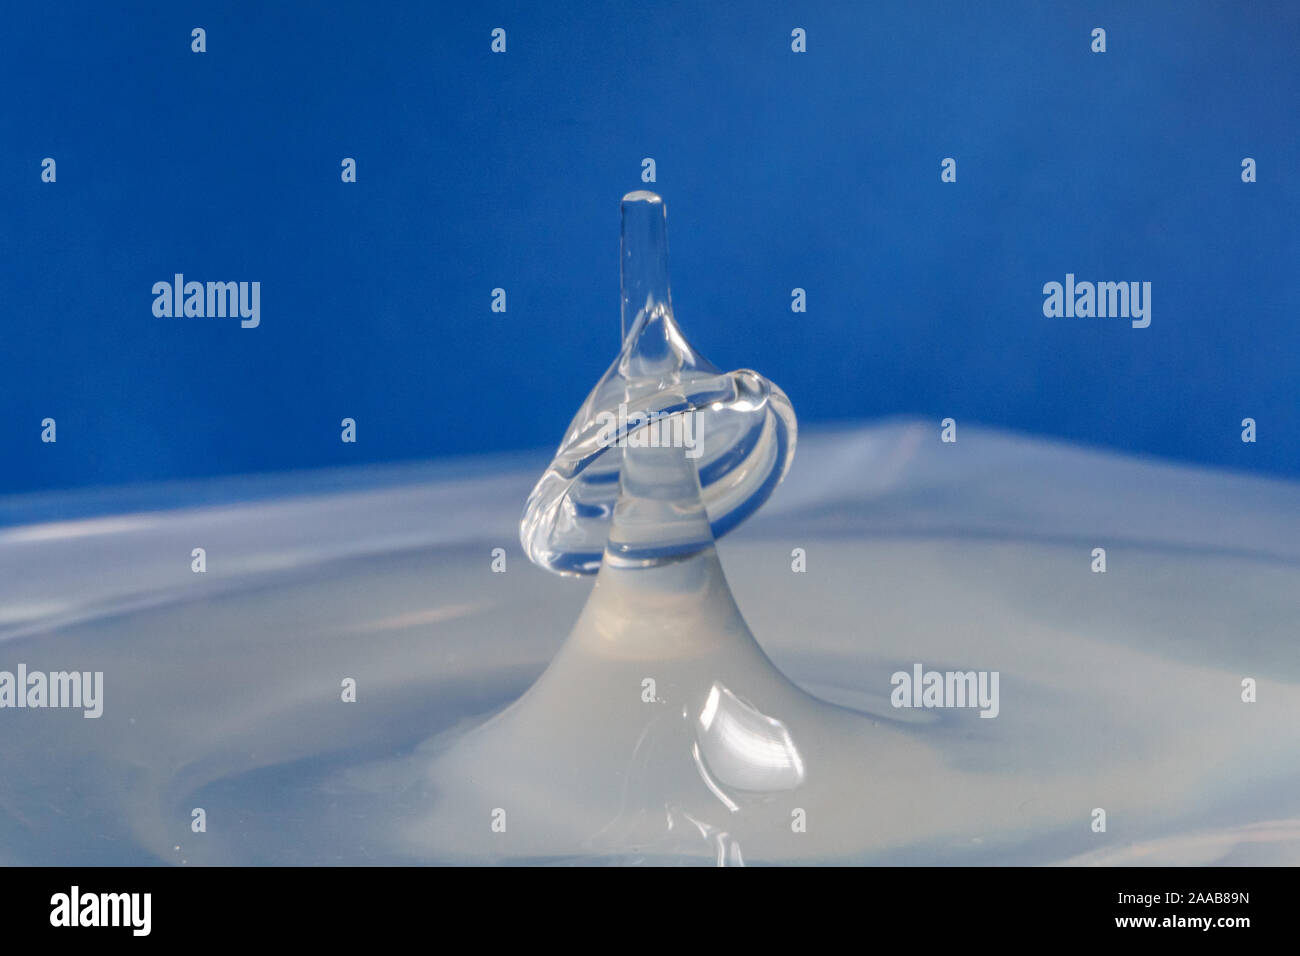 Water drop collision form with blue background Stock Photo